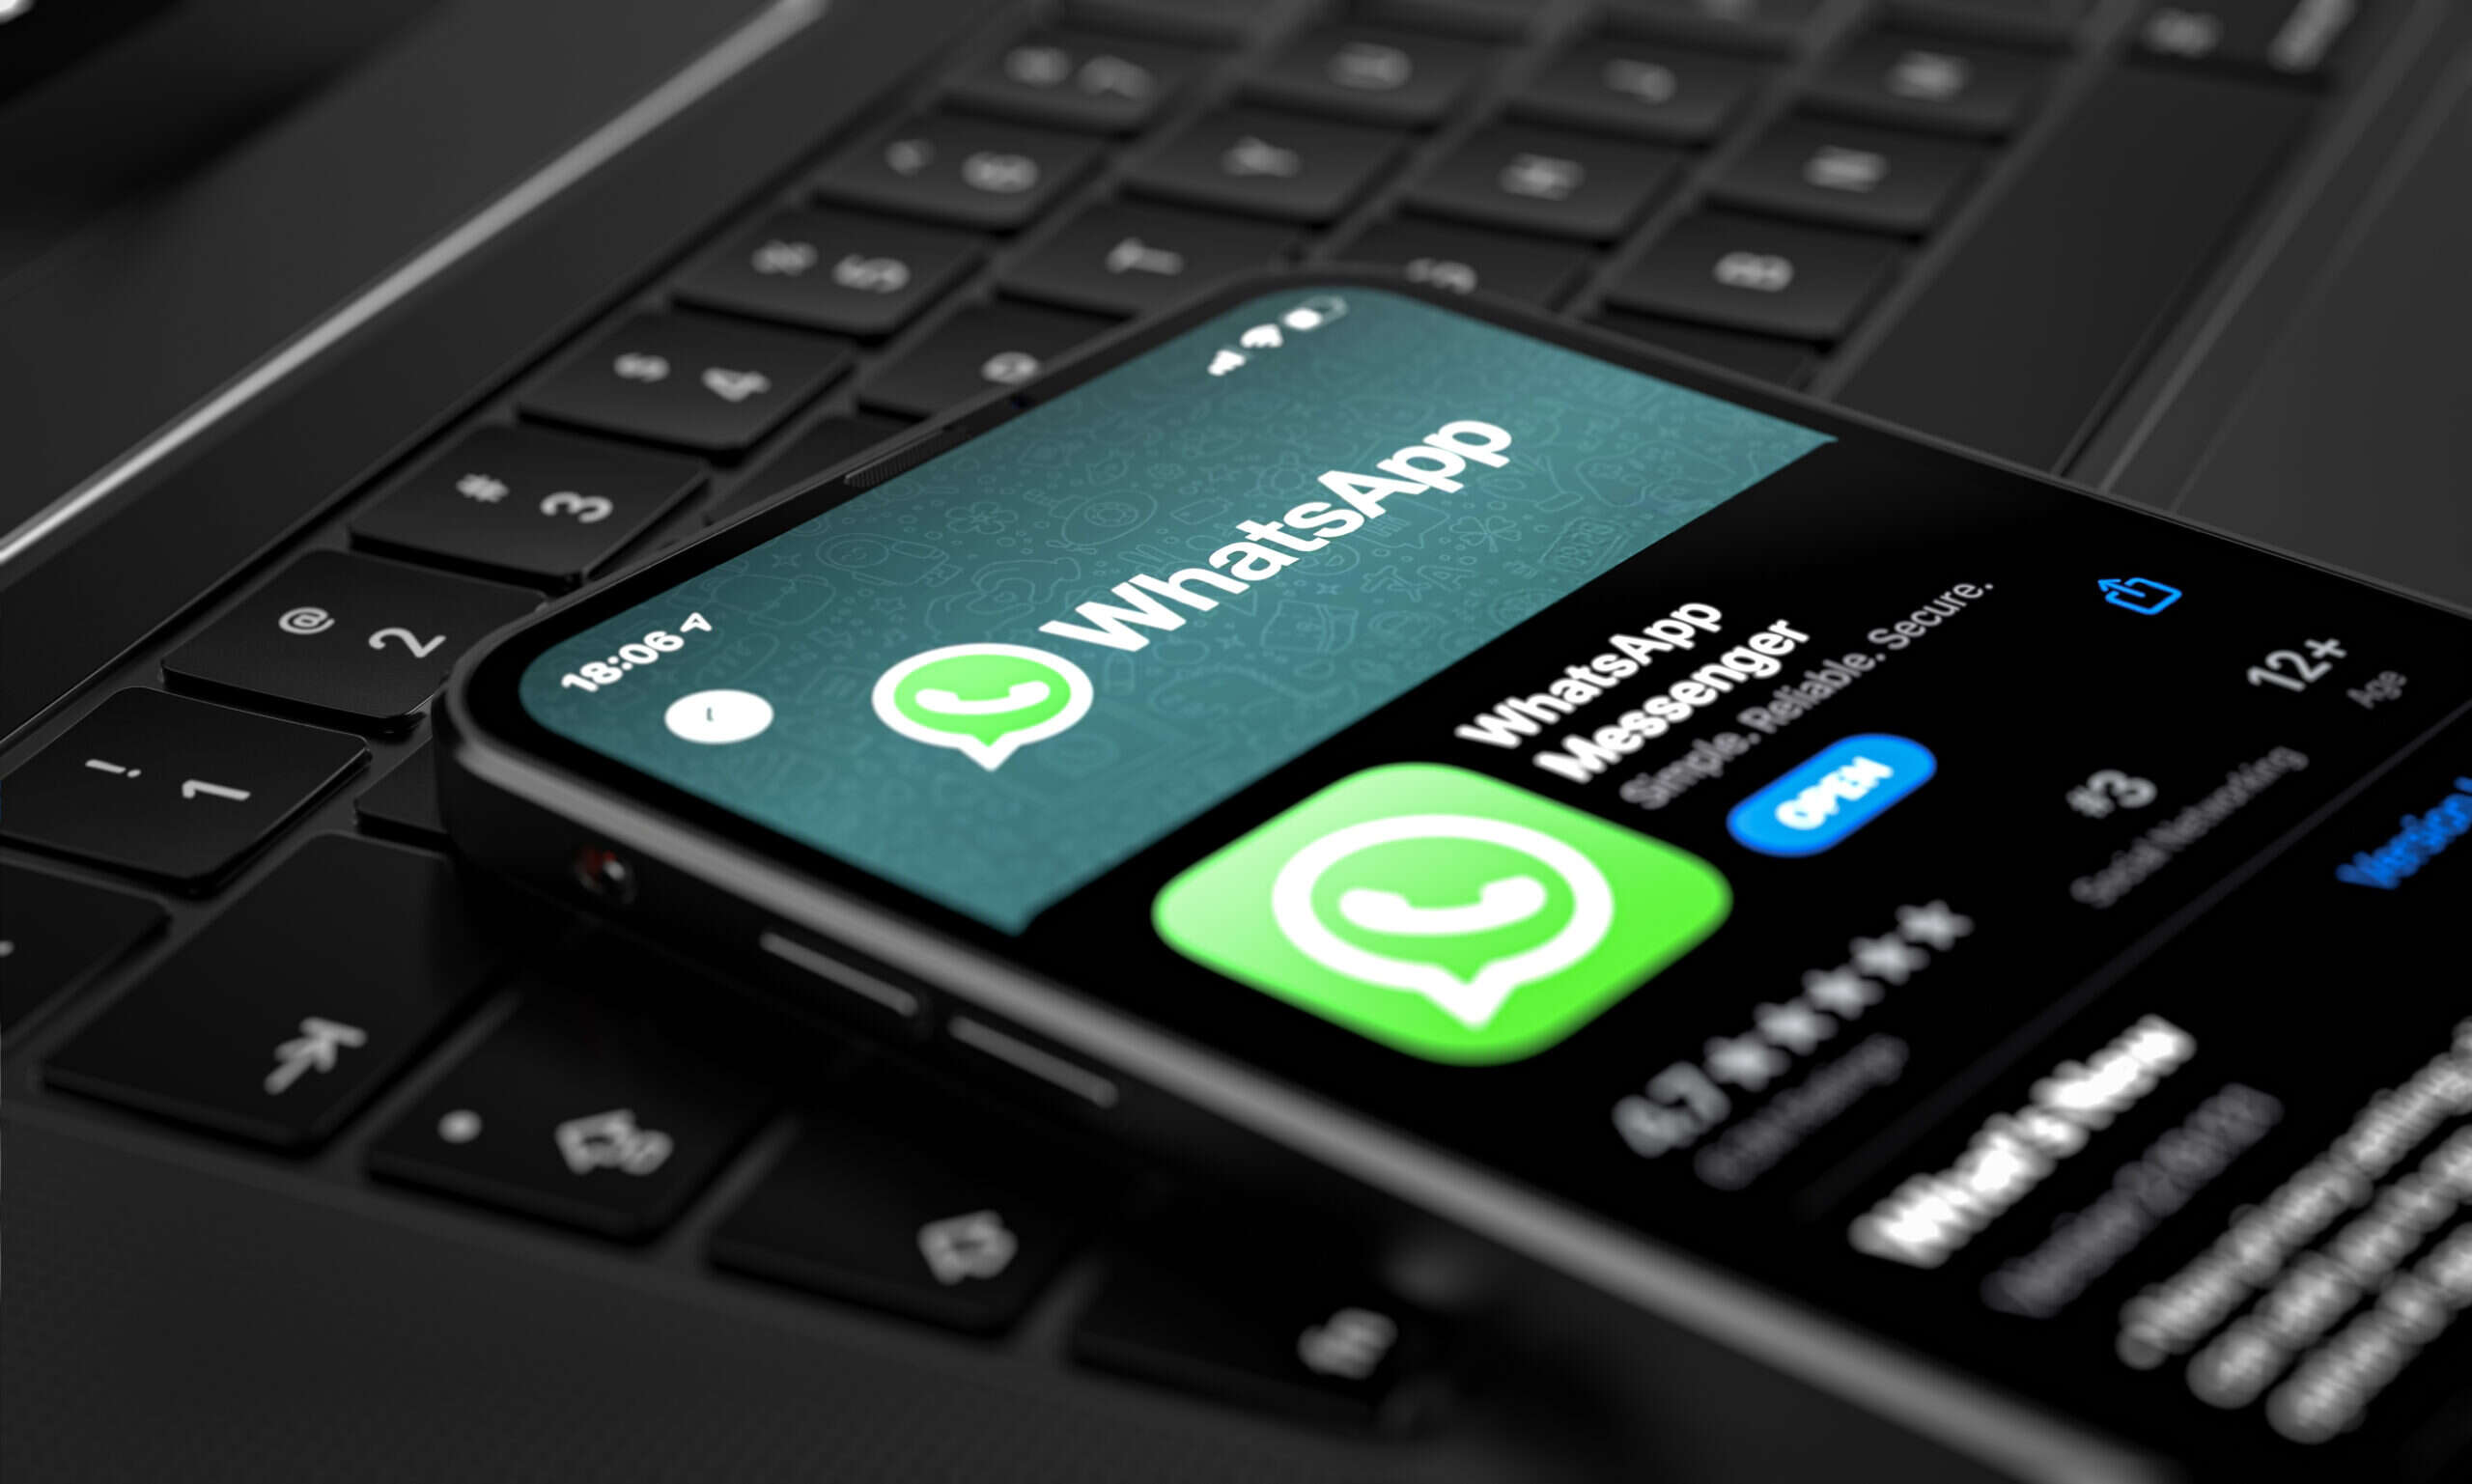 WhatsApp outage leads analysts to ask: Should we rely globally on a centralised application?